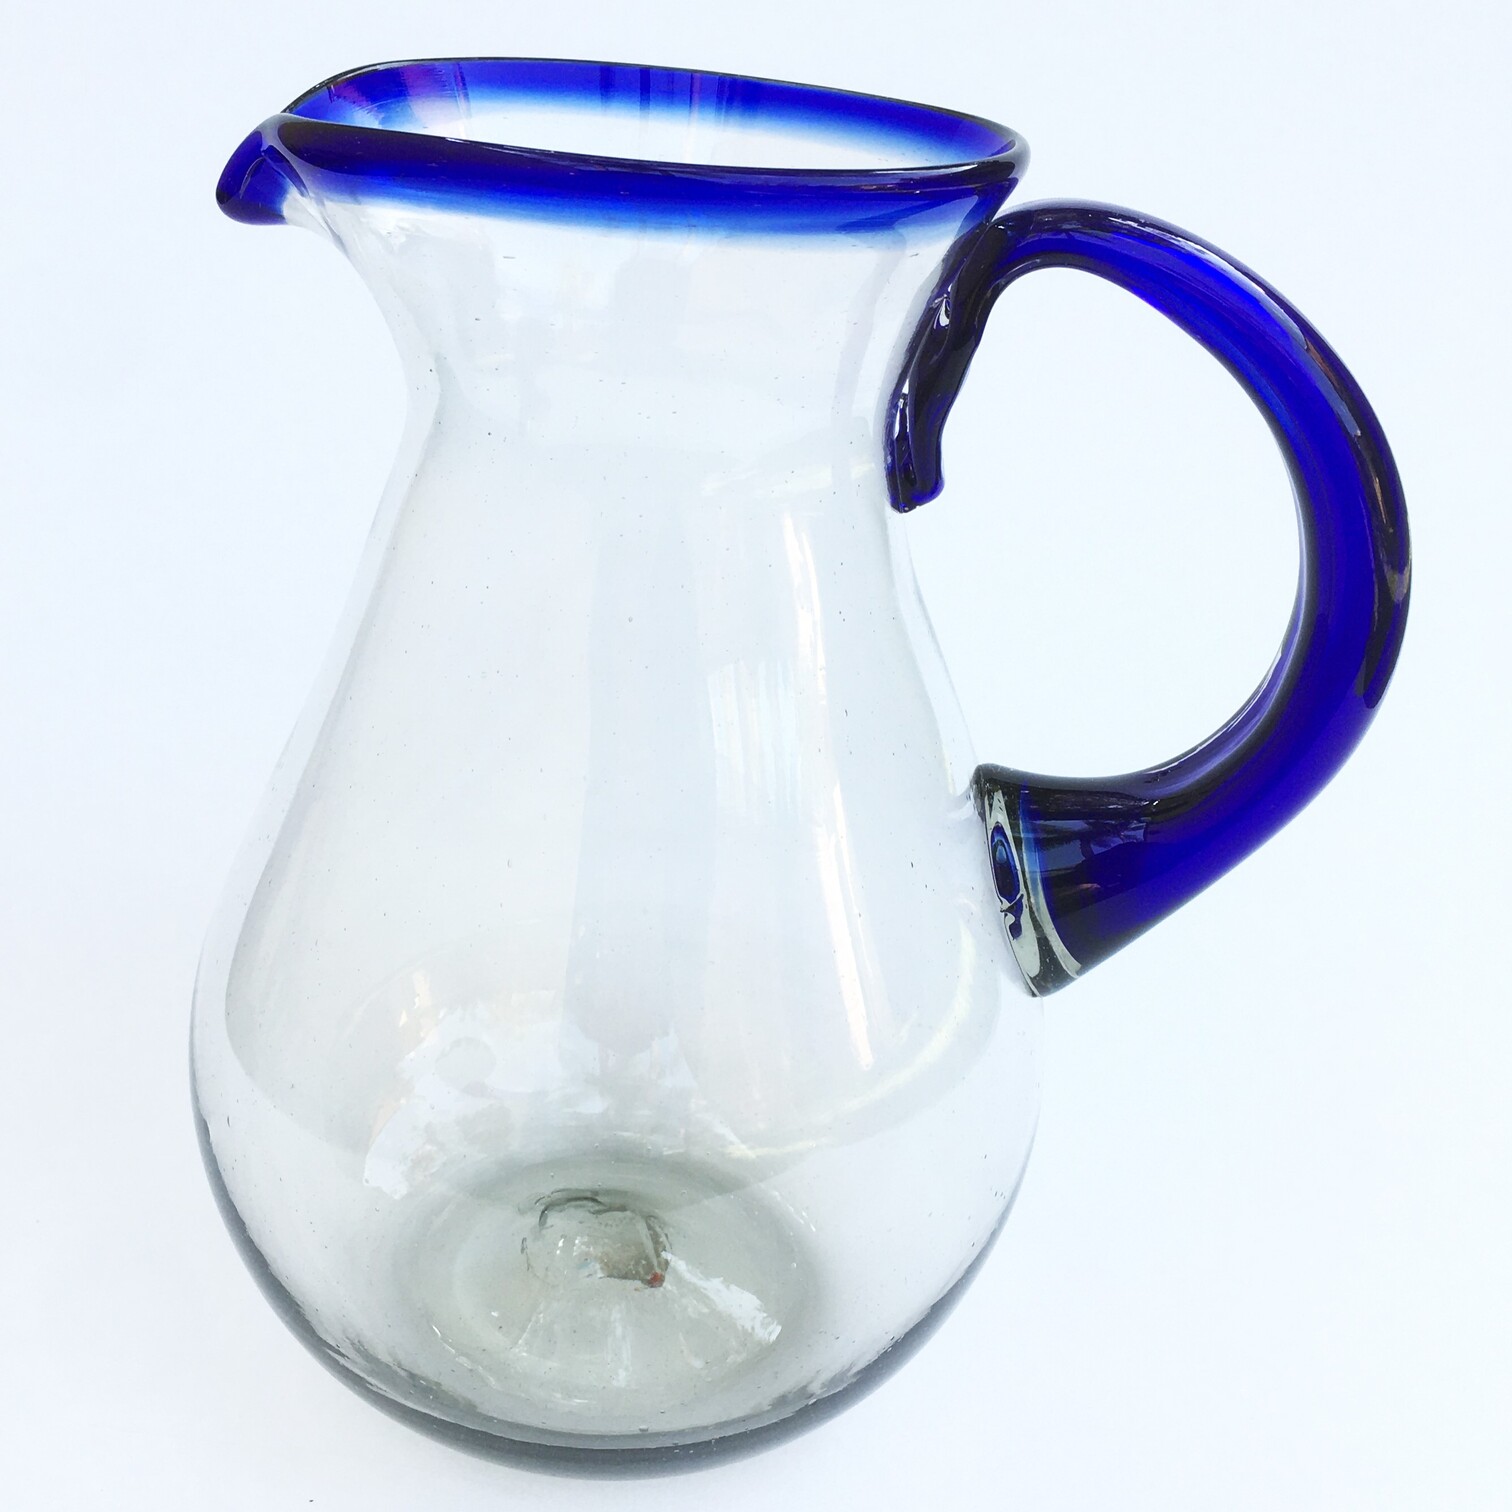 New Items / Cobalt Blue Rim Tall Pear Pitcher / This classic pitcher is perfect for pouring out all kinds of refreshing drinks.